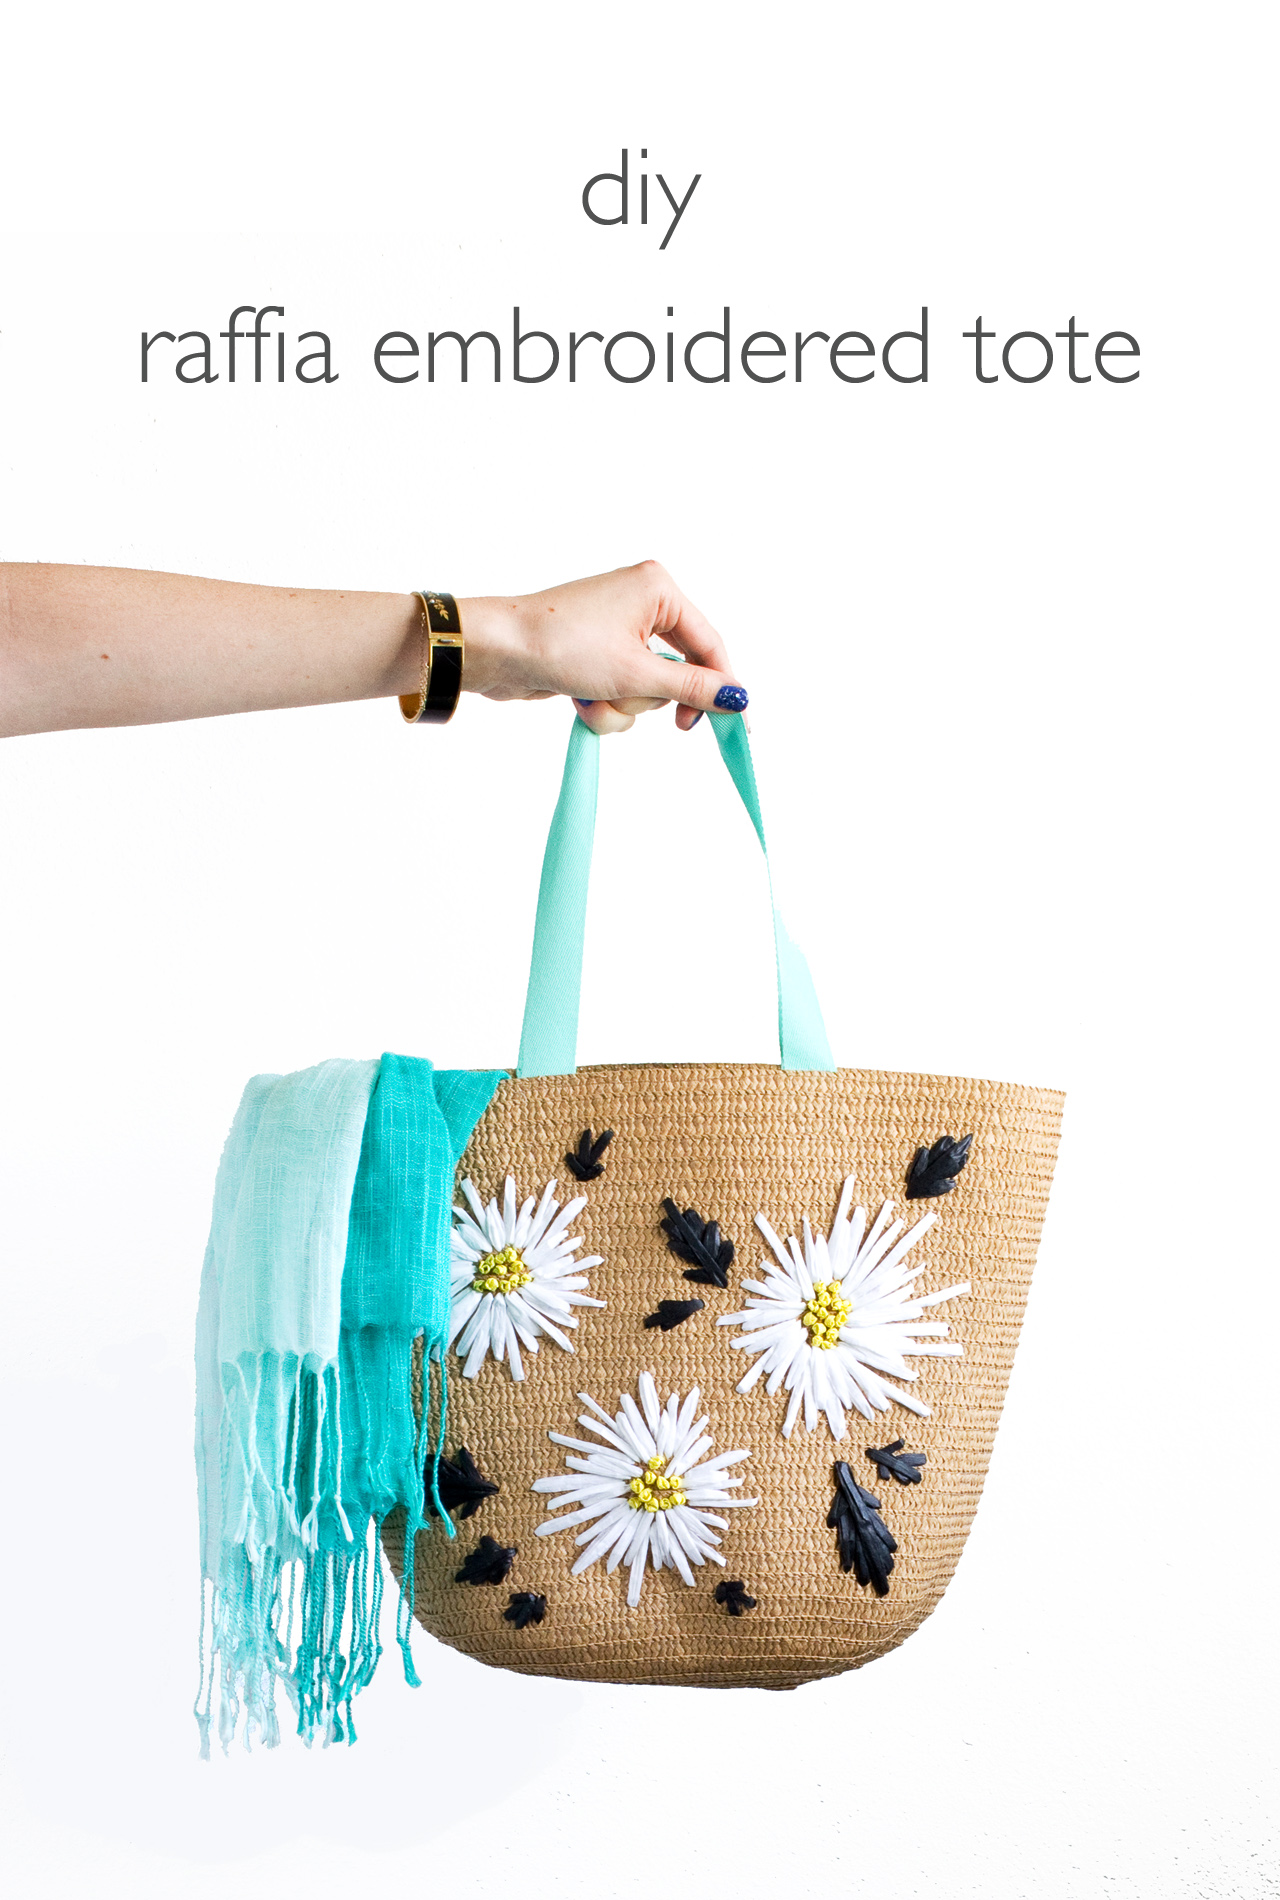 DIY Raffia Embroidered Tote | click through for the full tutorial!